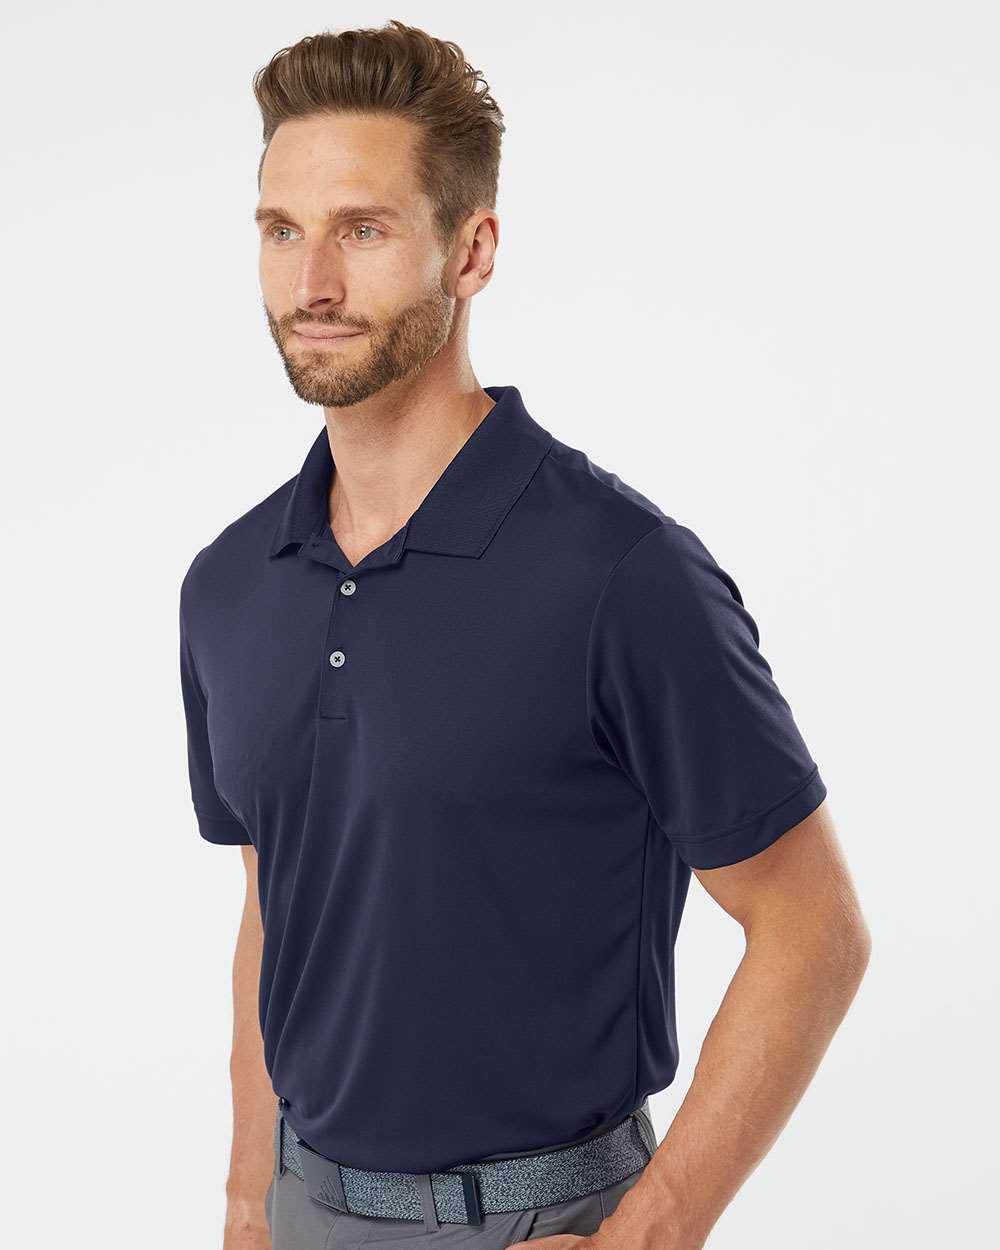 Adidas A230 Performance Polo #colormdl_Navy